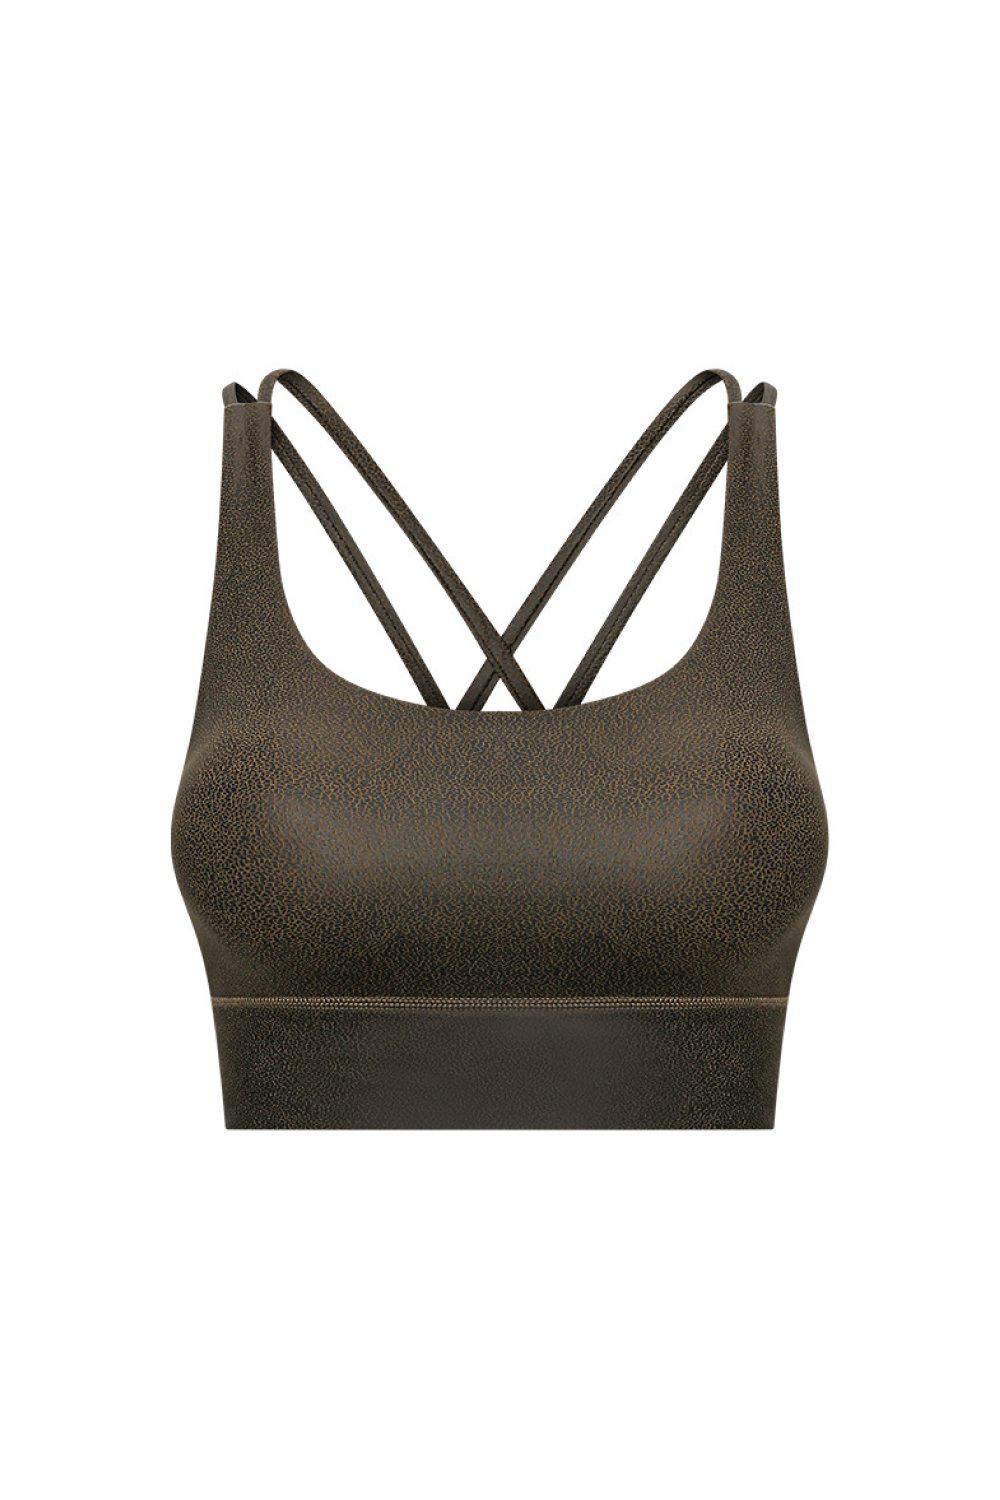 Crisscross Strapy Back Underwear-ACTIVE TOPS (TRENDSI NEED SIZE CHART)-[Adult]-[Female]-Brown-4-Blue Zone Planet